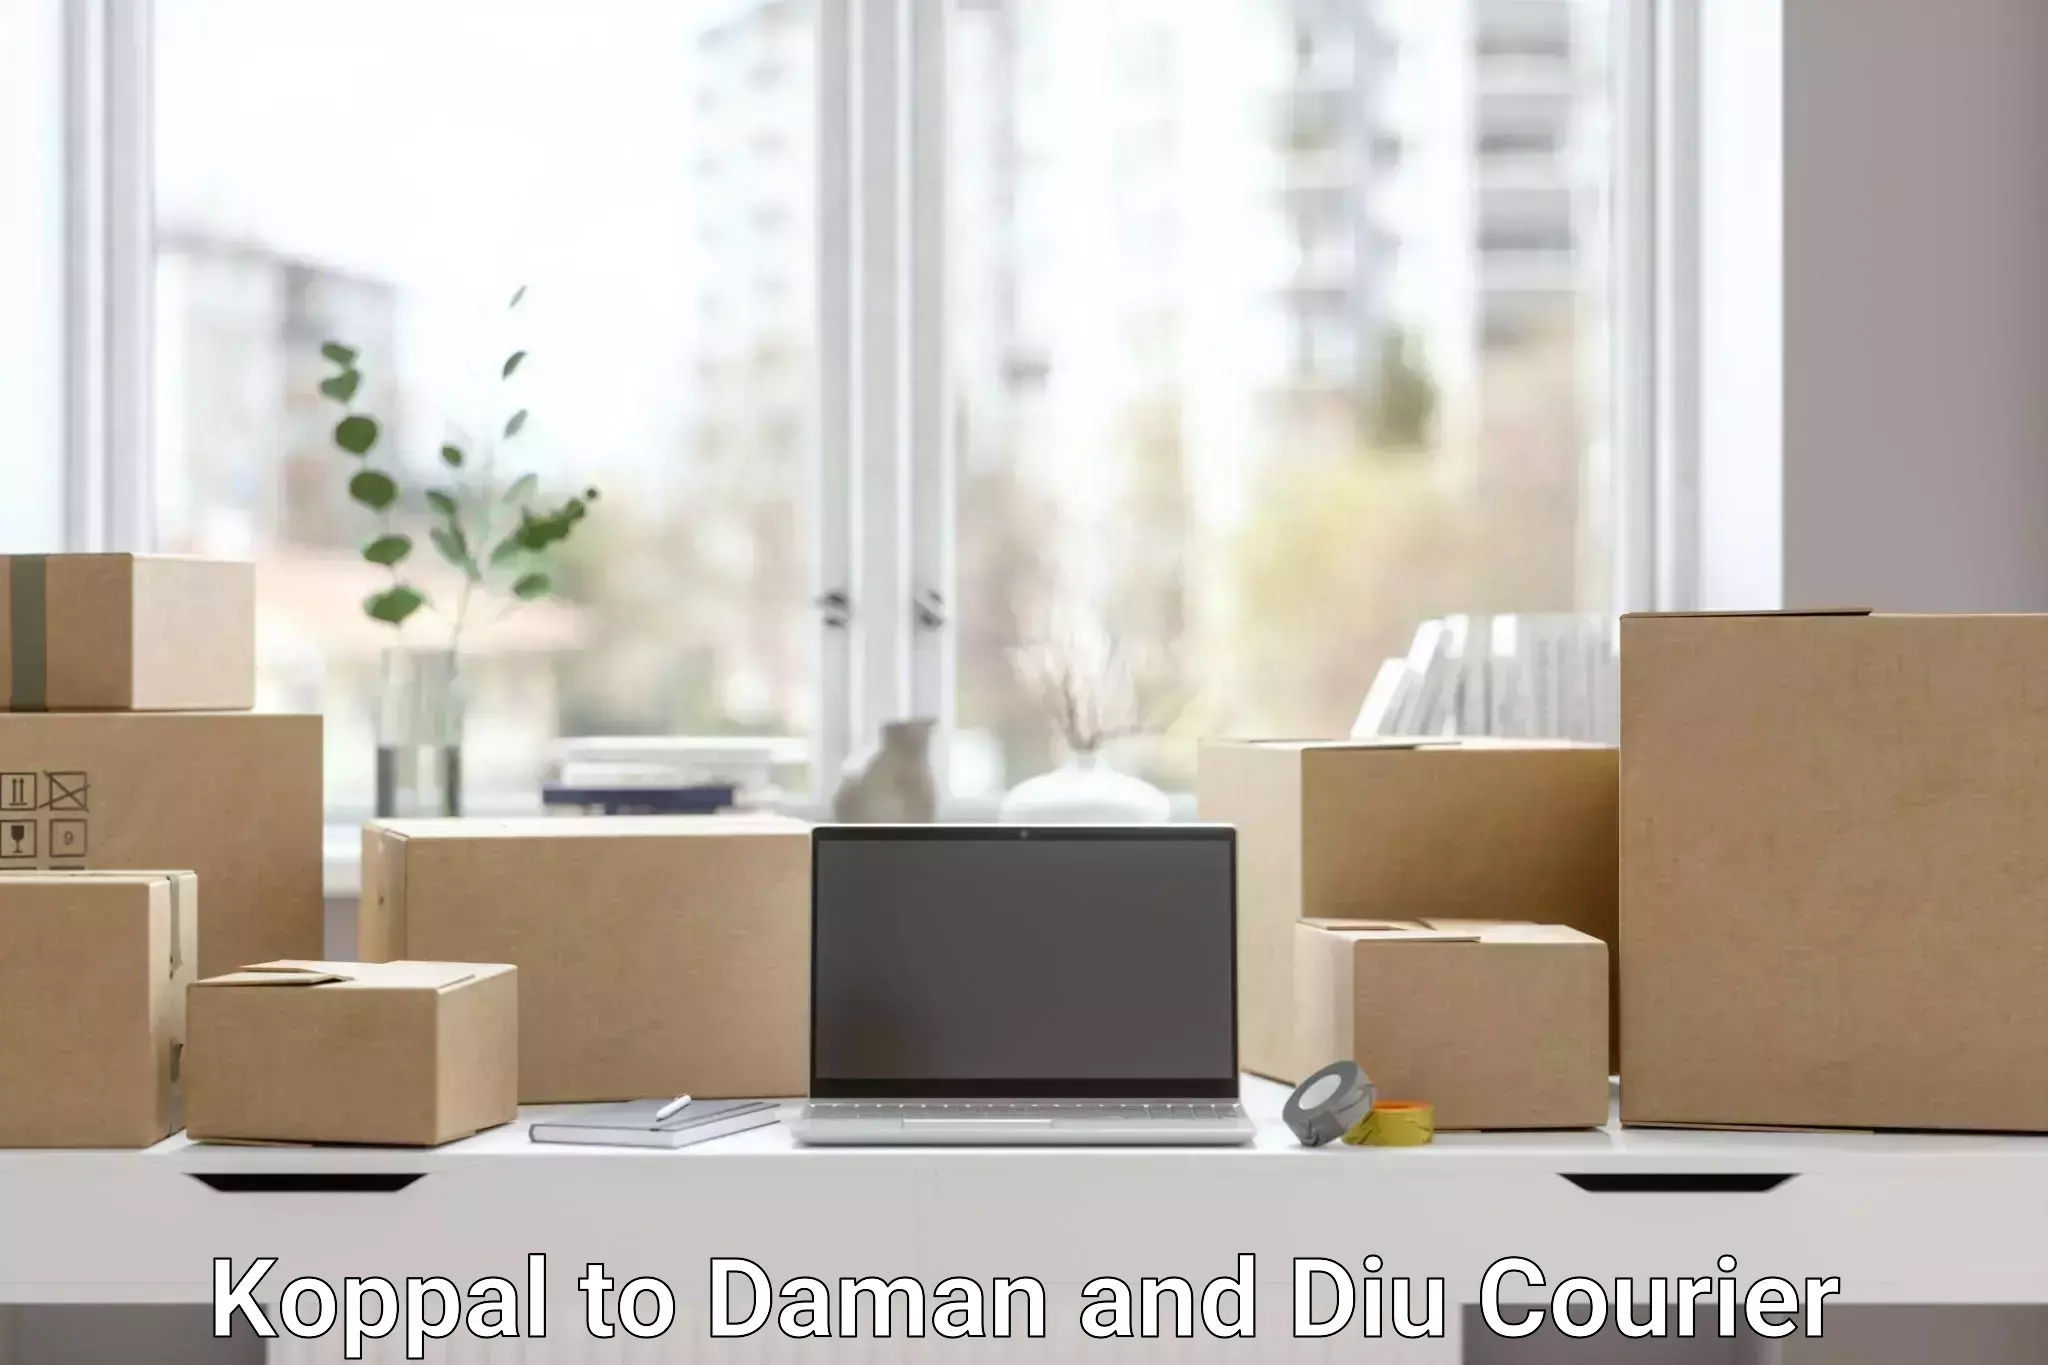 Easy access courier services Koppal to Daman and Diu